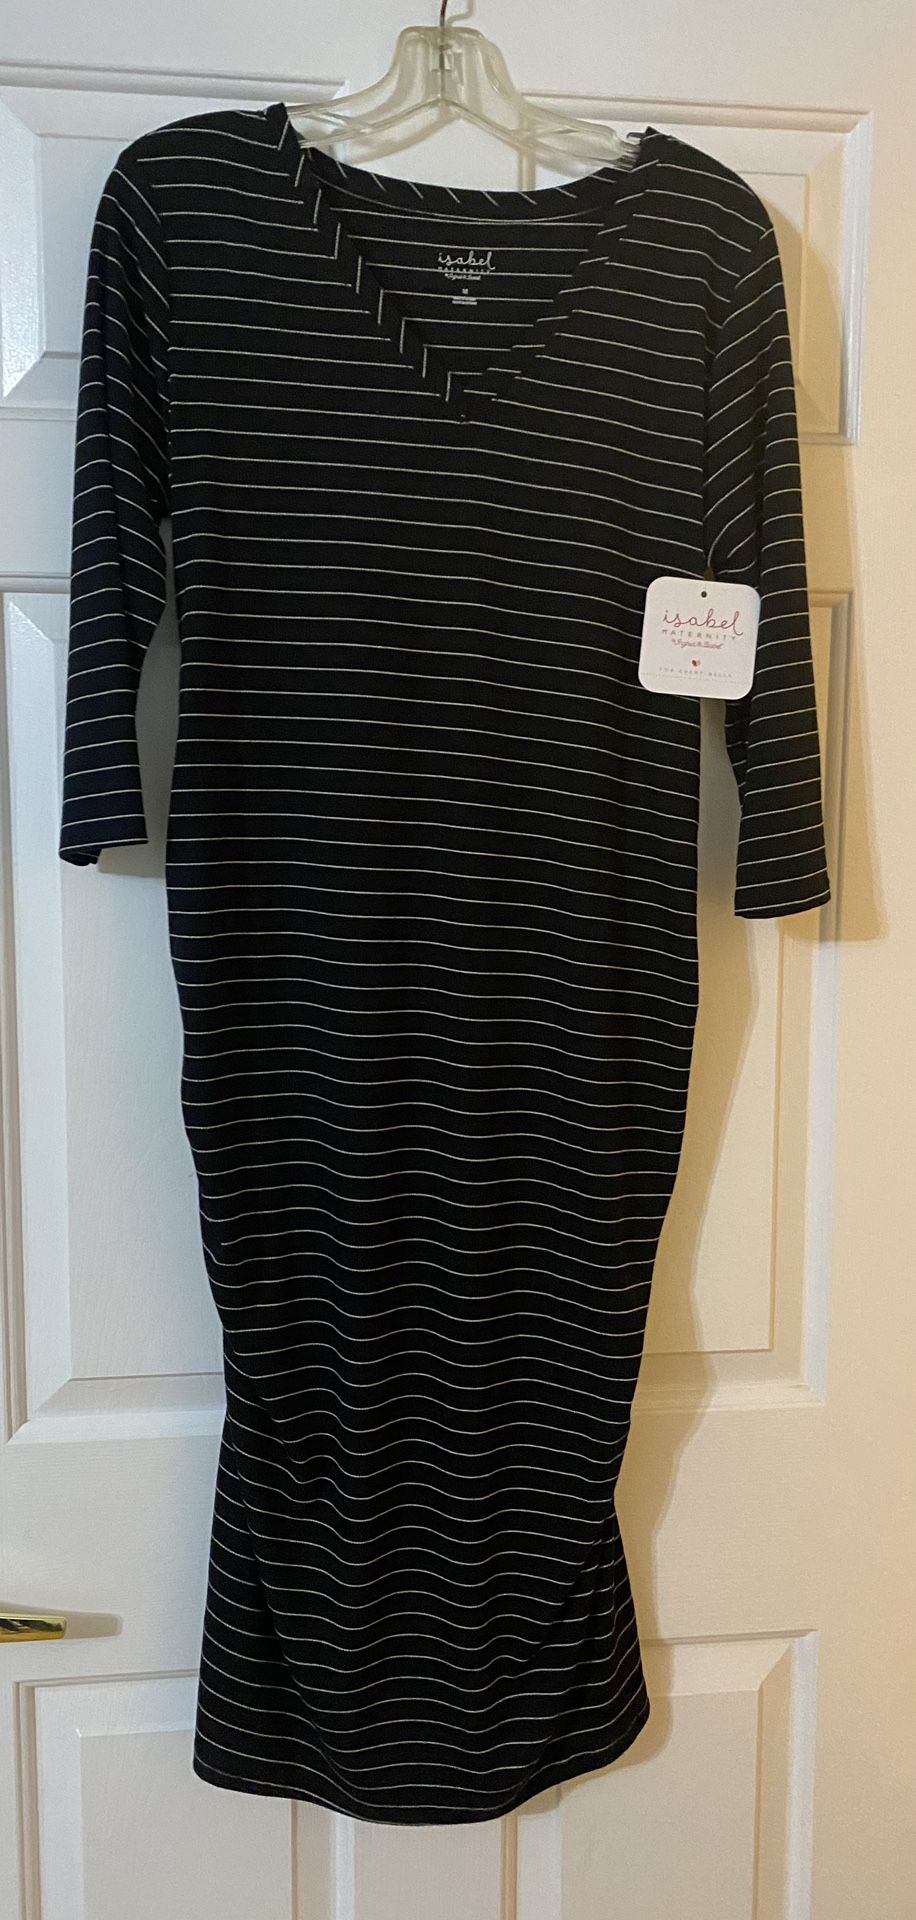 Isabel Maternity Dress - Black + White - New With Tags